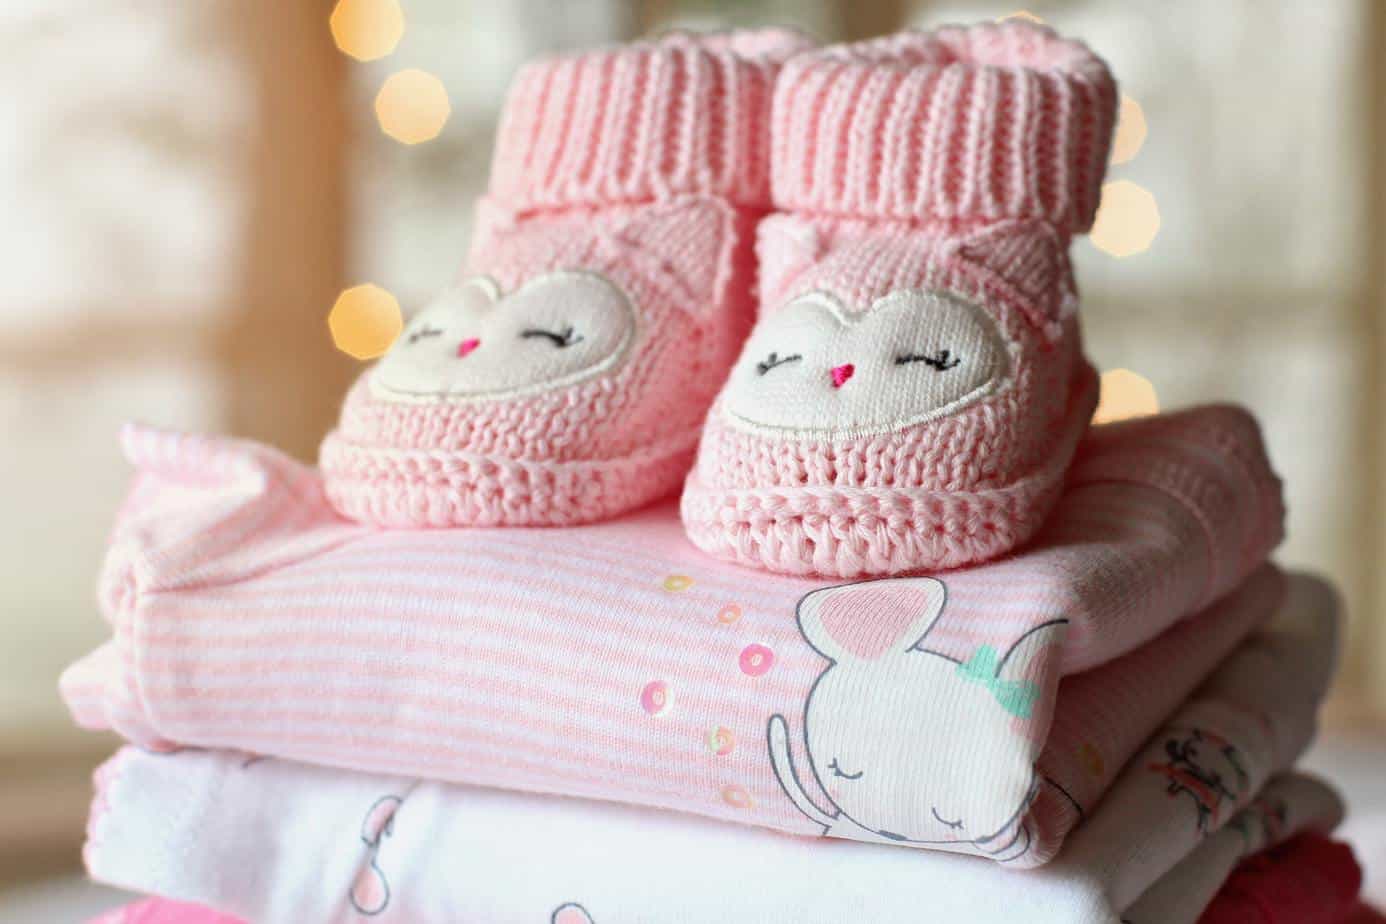 baby freebies today - pink booties on folded baby clothes